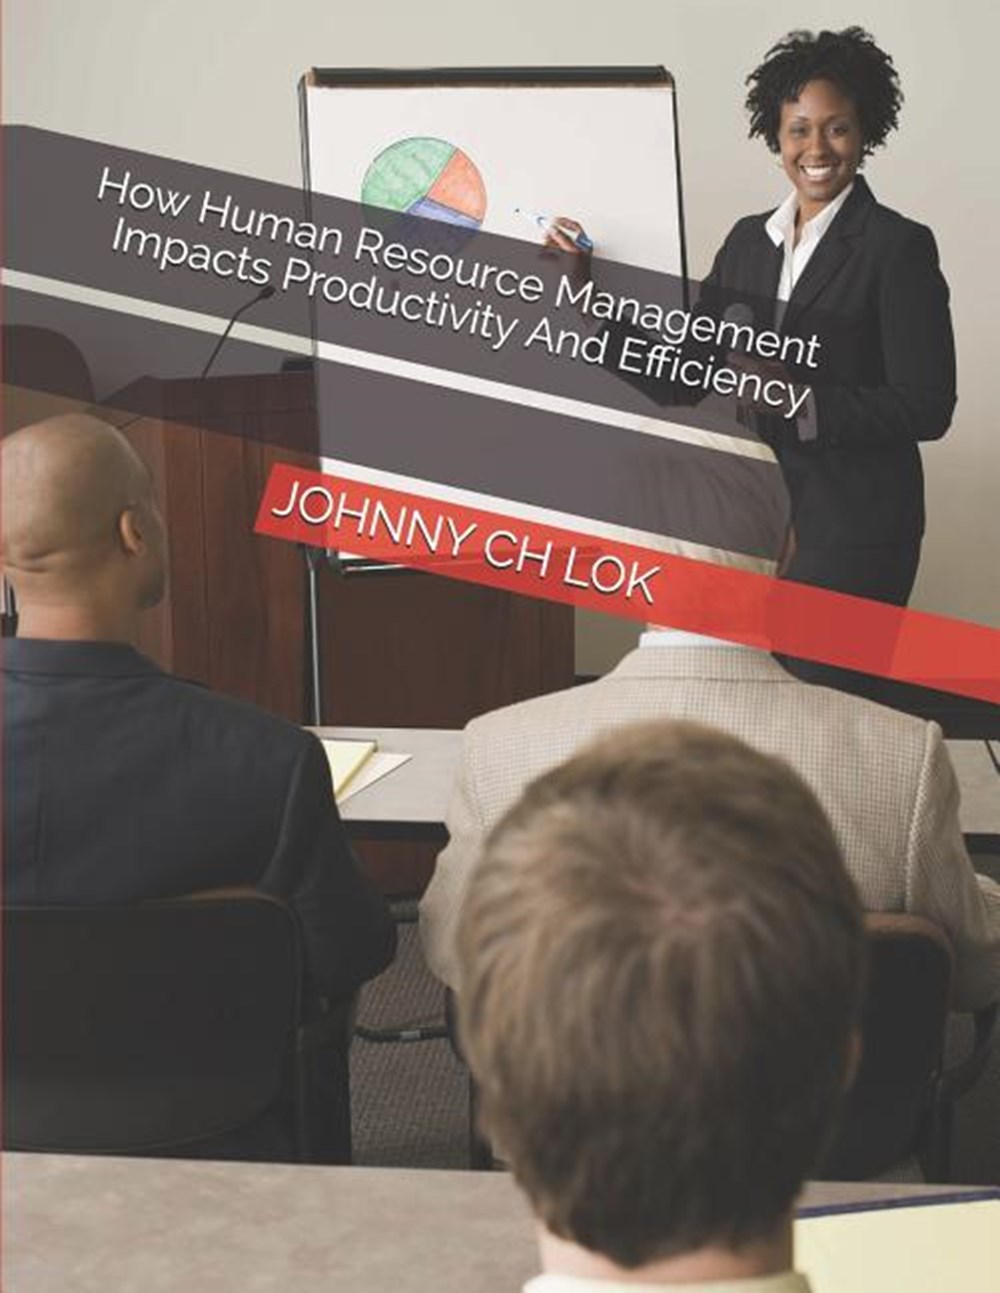 How Human Resource Management Impacts Productivity: And Efficiency